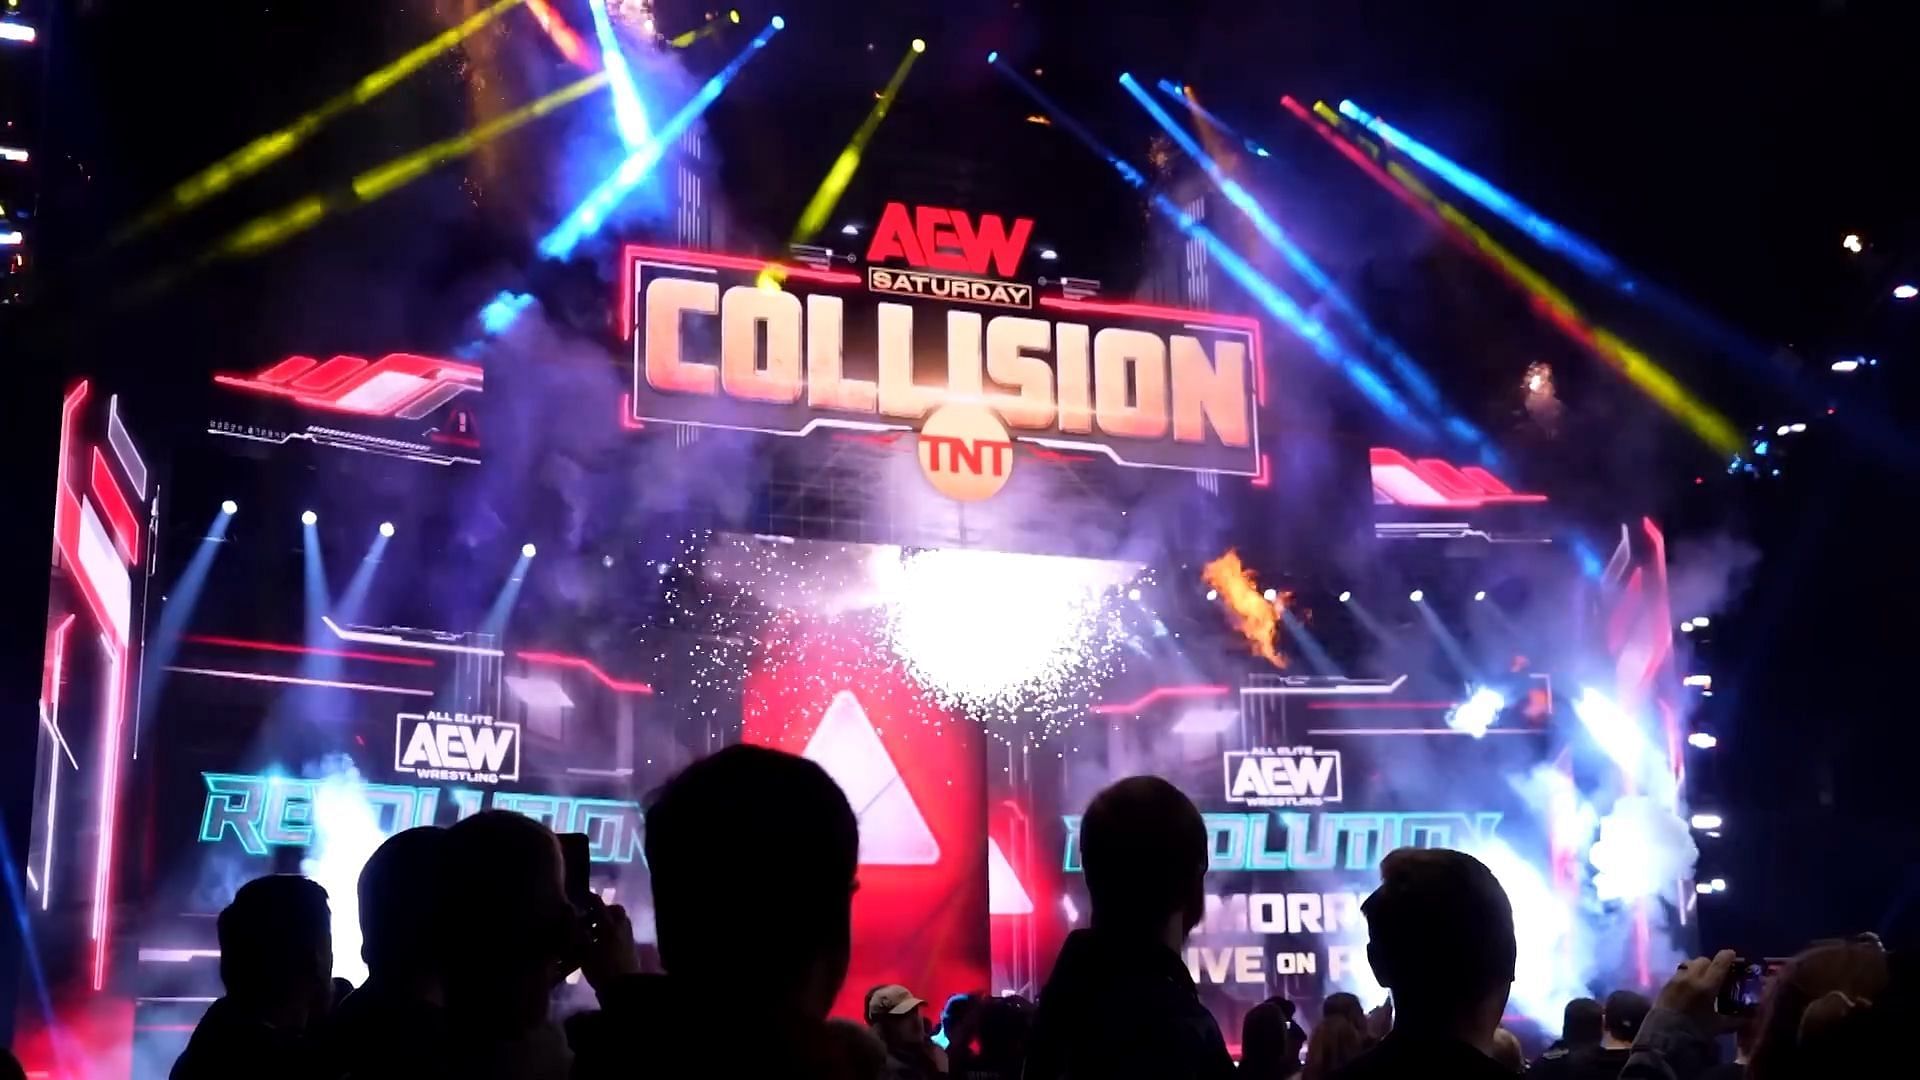 AEW Collision airs Saturdays on TNT (image credit: All Elite Wrestling on YouTube)